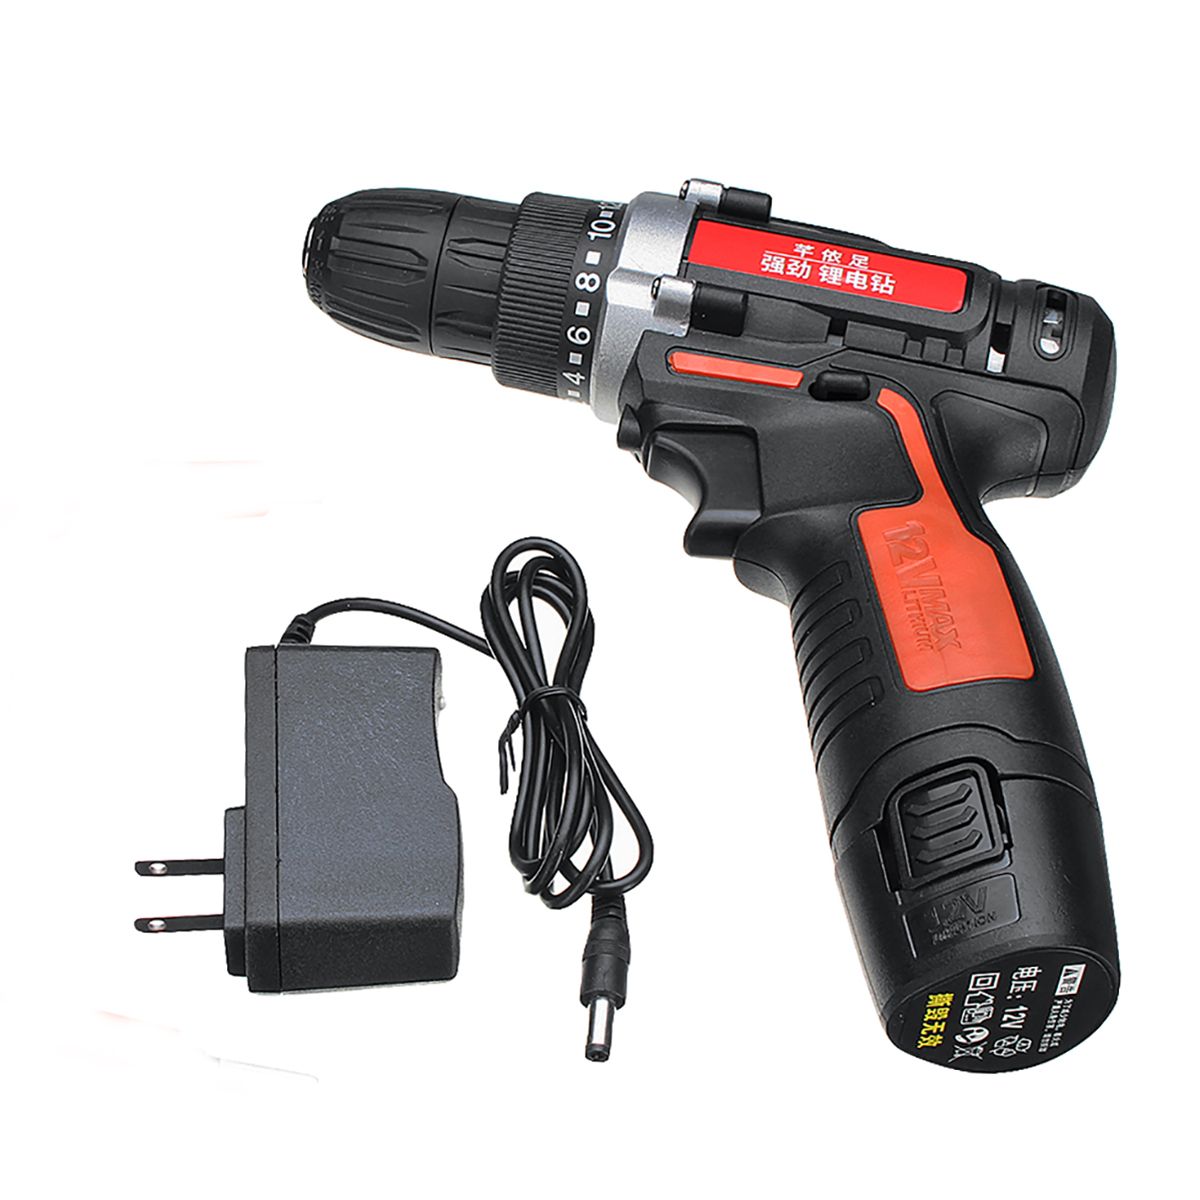 Raitool-12V24V-Lithium-Battery-Power-Drill-Cordless-Rechargeable-2-Speed-Electric-Drill-1396186